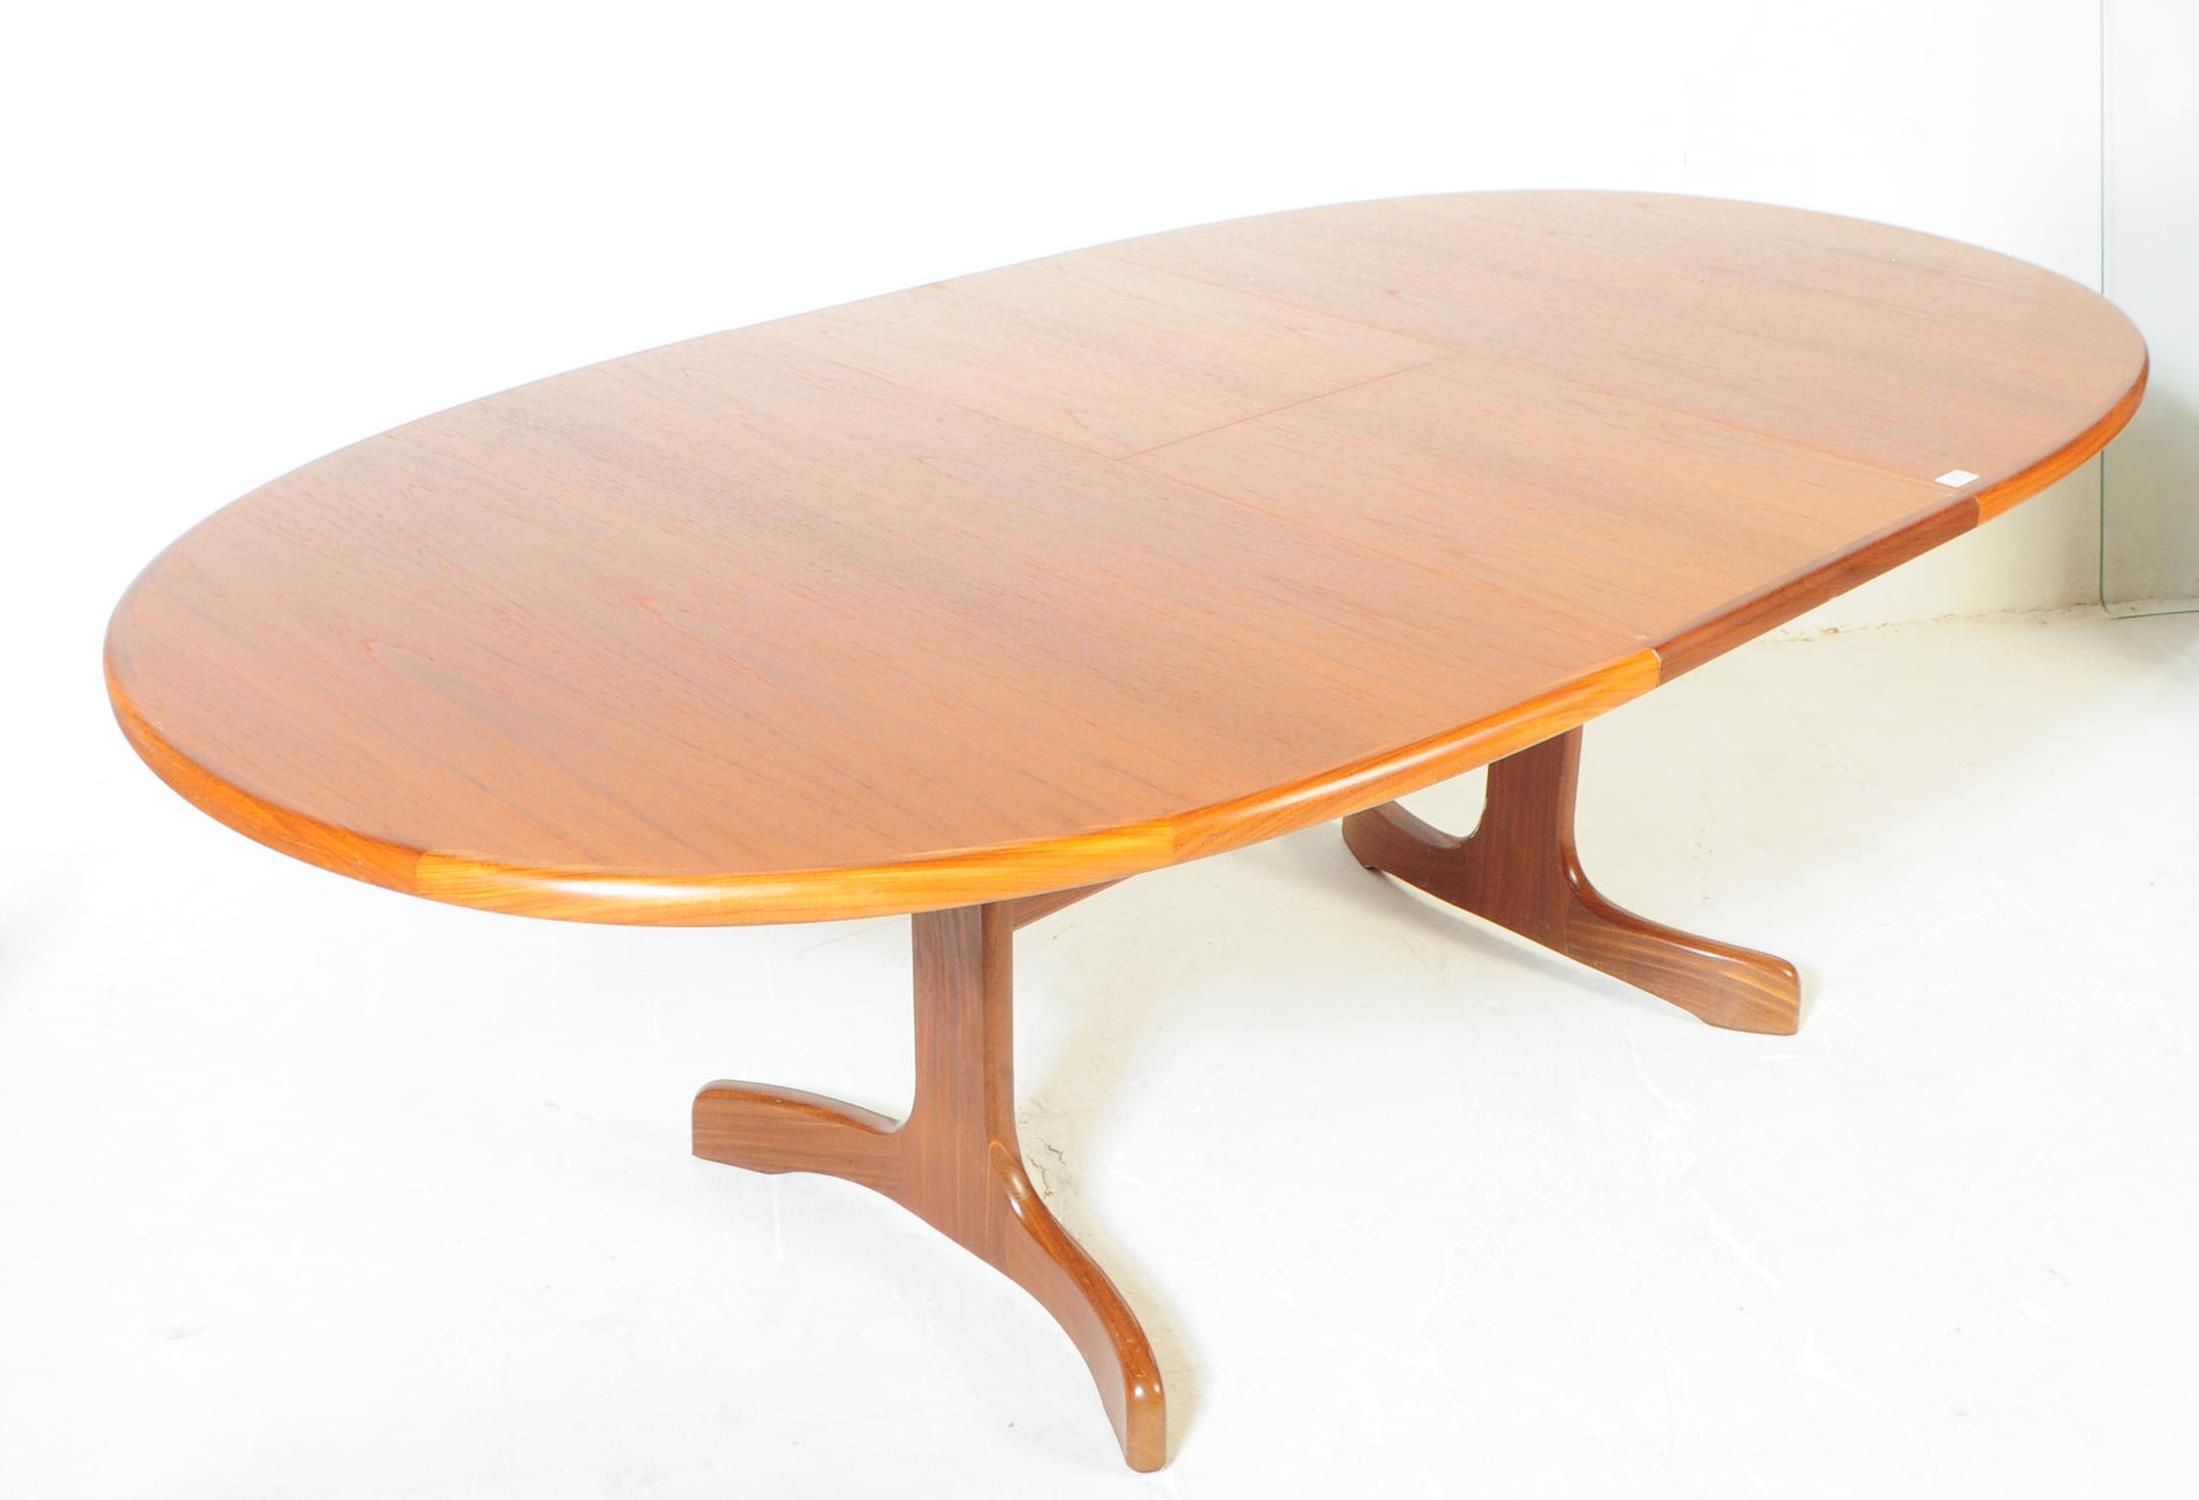 G-PLAN FRESCO - MID CENTURY TABLE & CHAIRS - Image 6 of 9